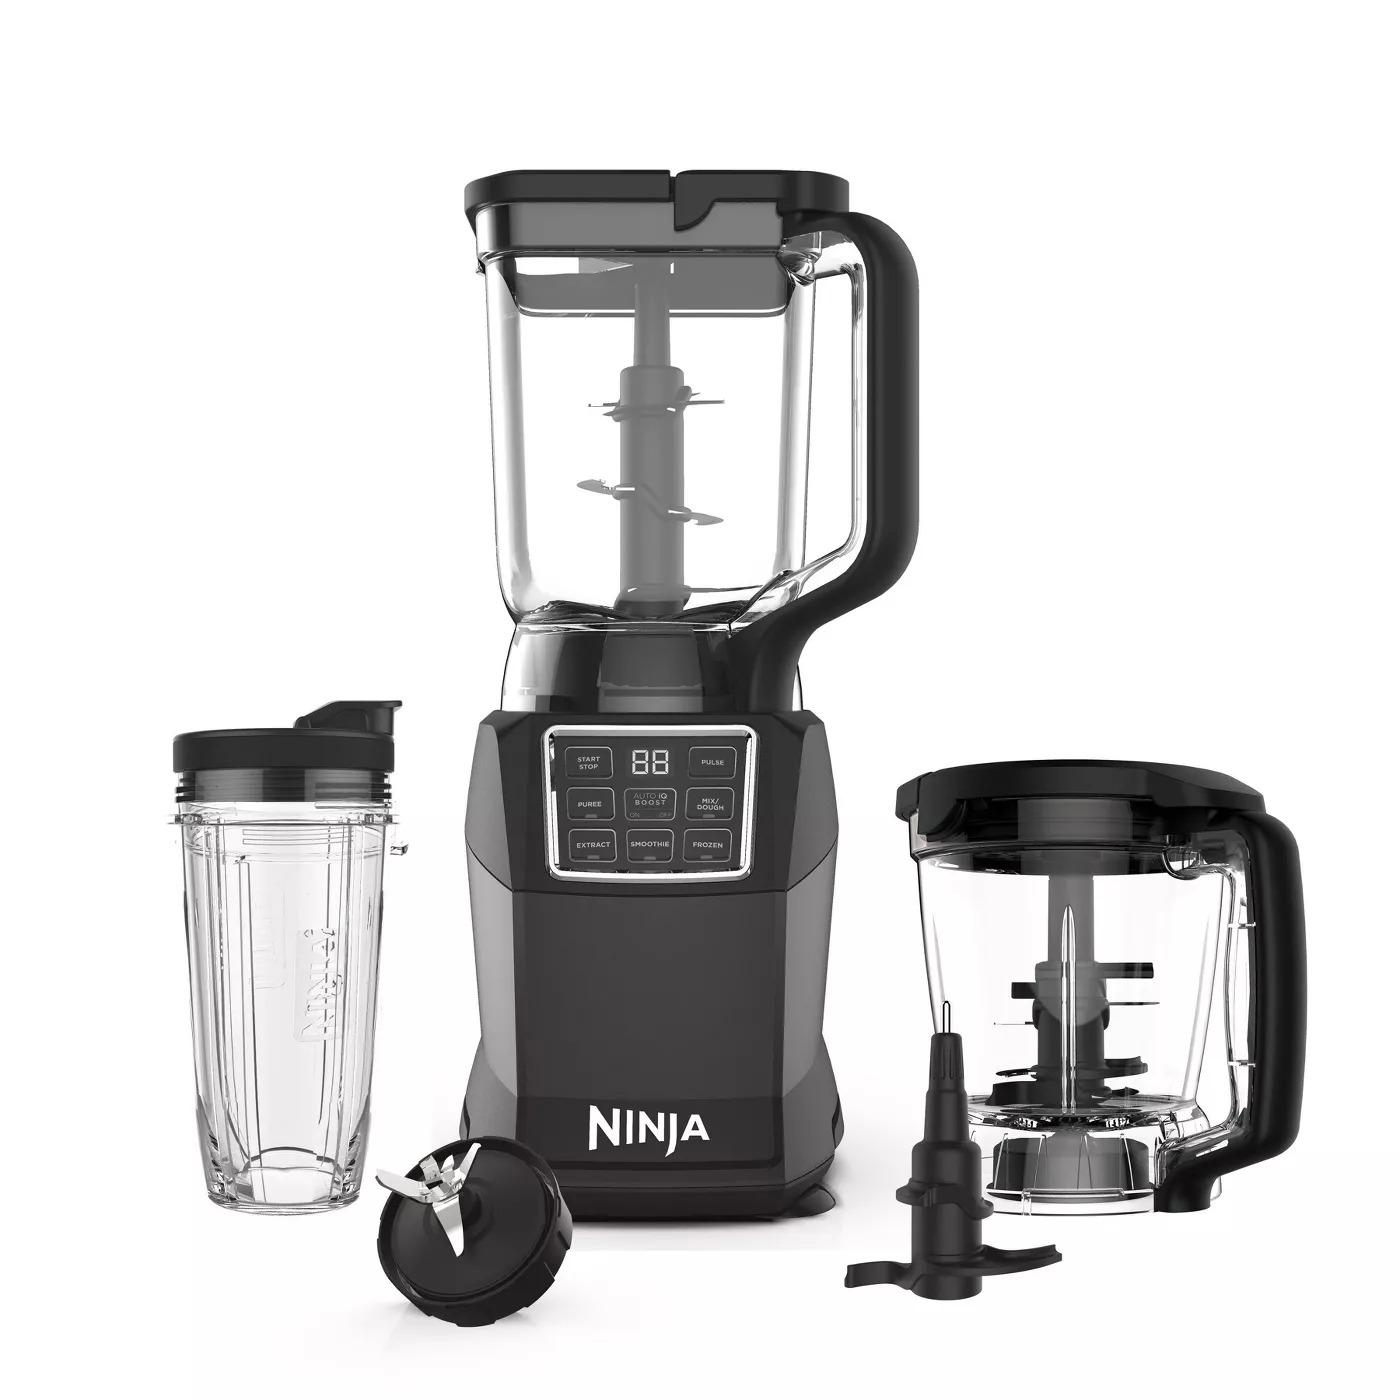 Ninja Kitchen Blender System with Auto IQ Boost for $99.99 Shipped